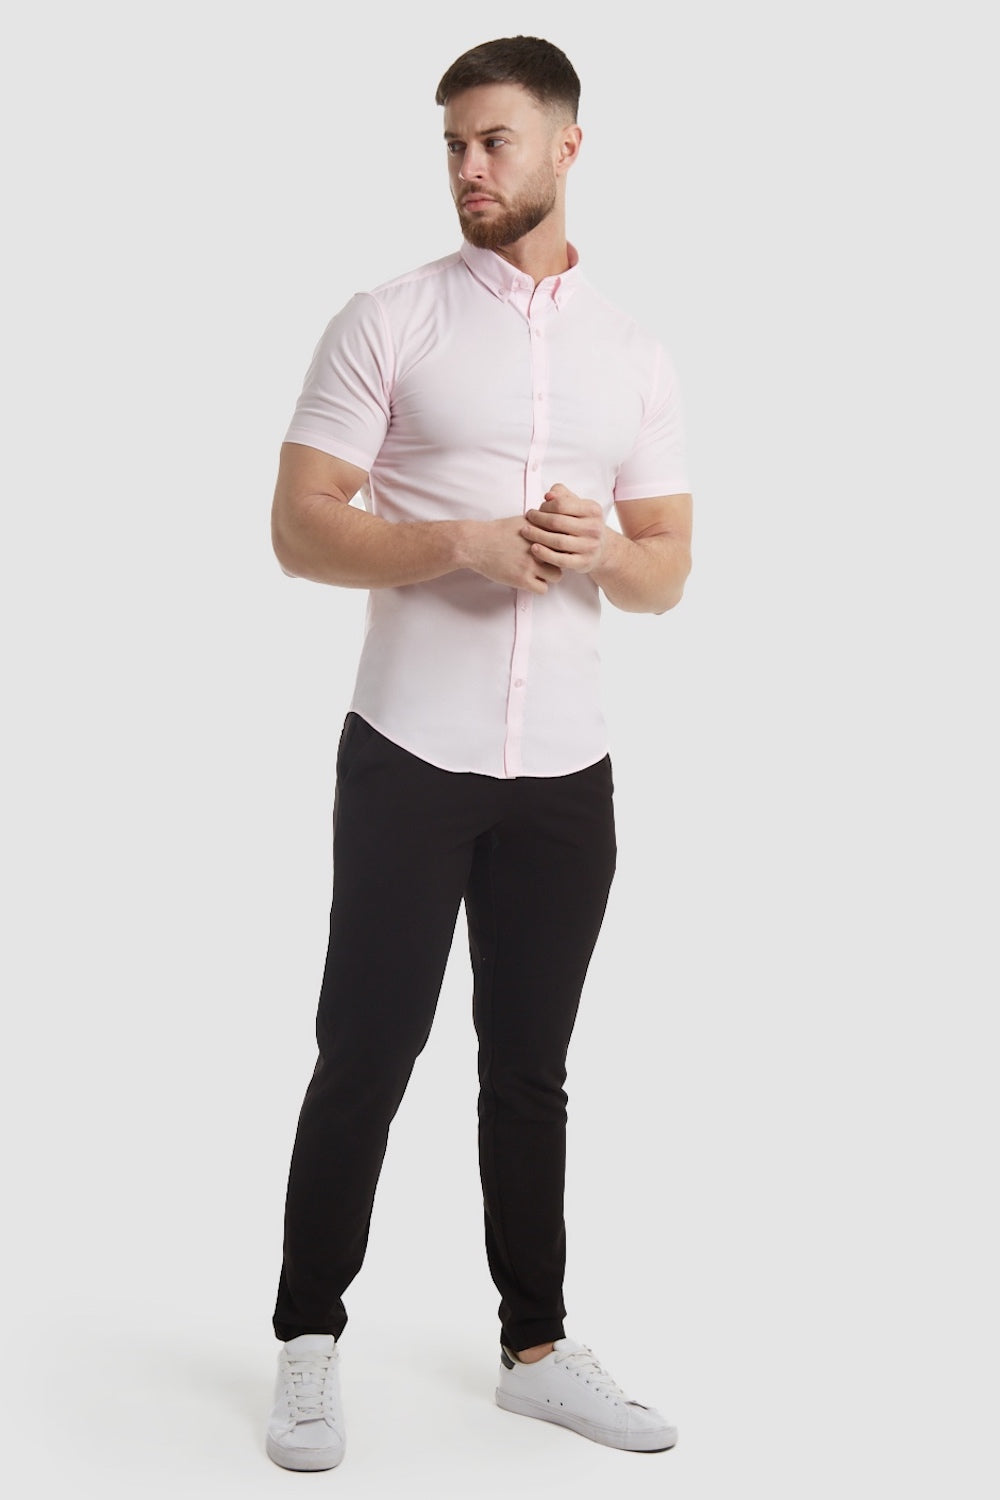 Easy Care Signature Shirt in Light Pink - TAILORED ATHLETE - ROW